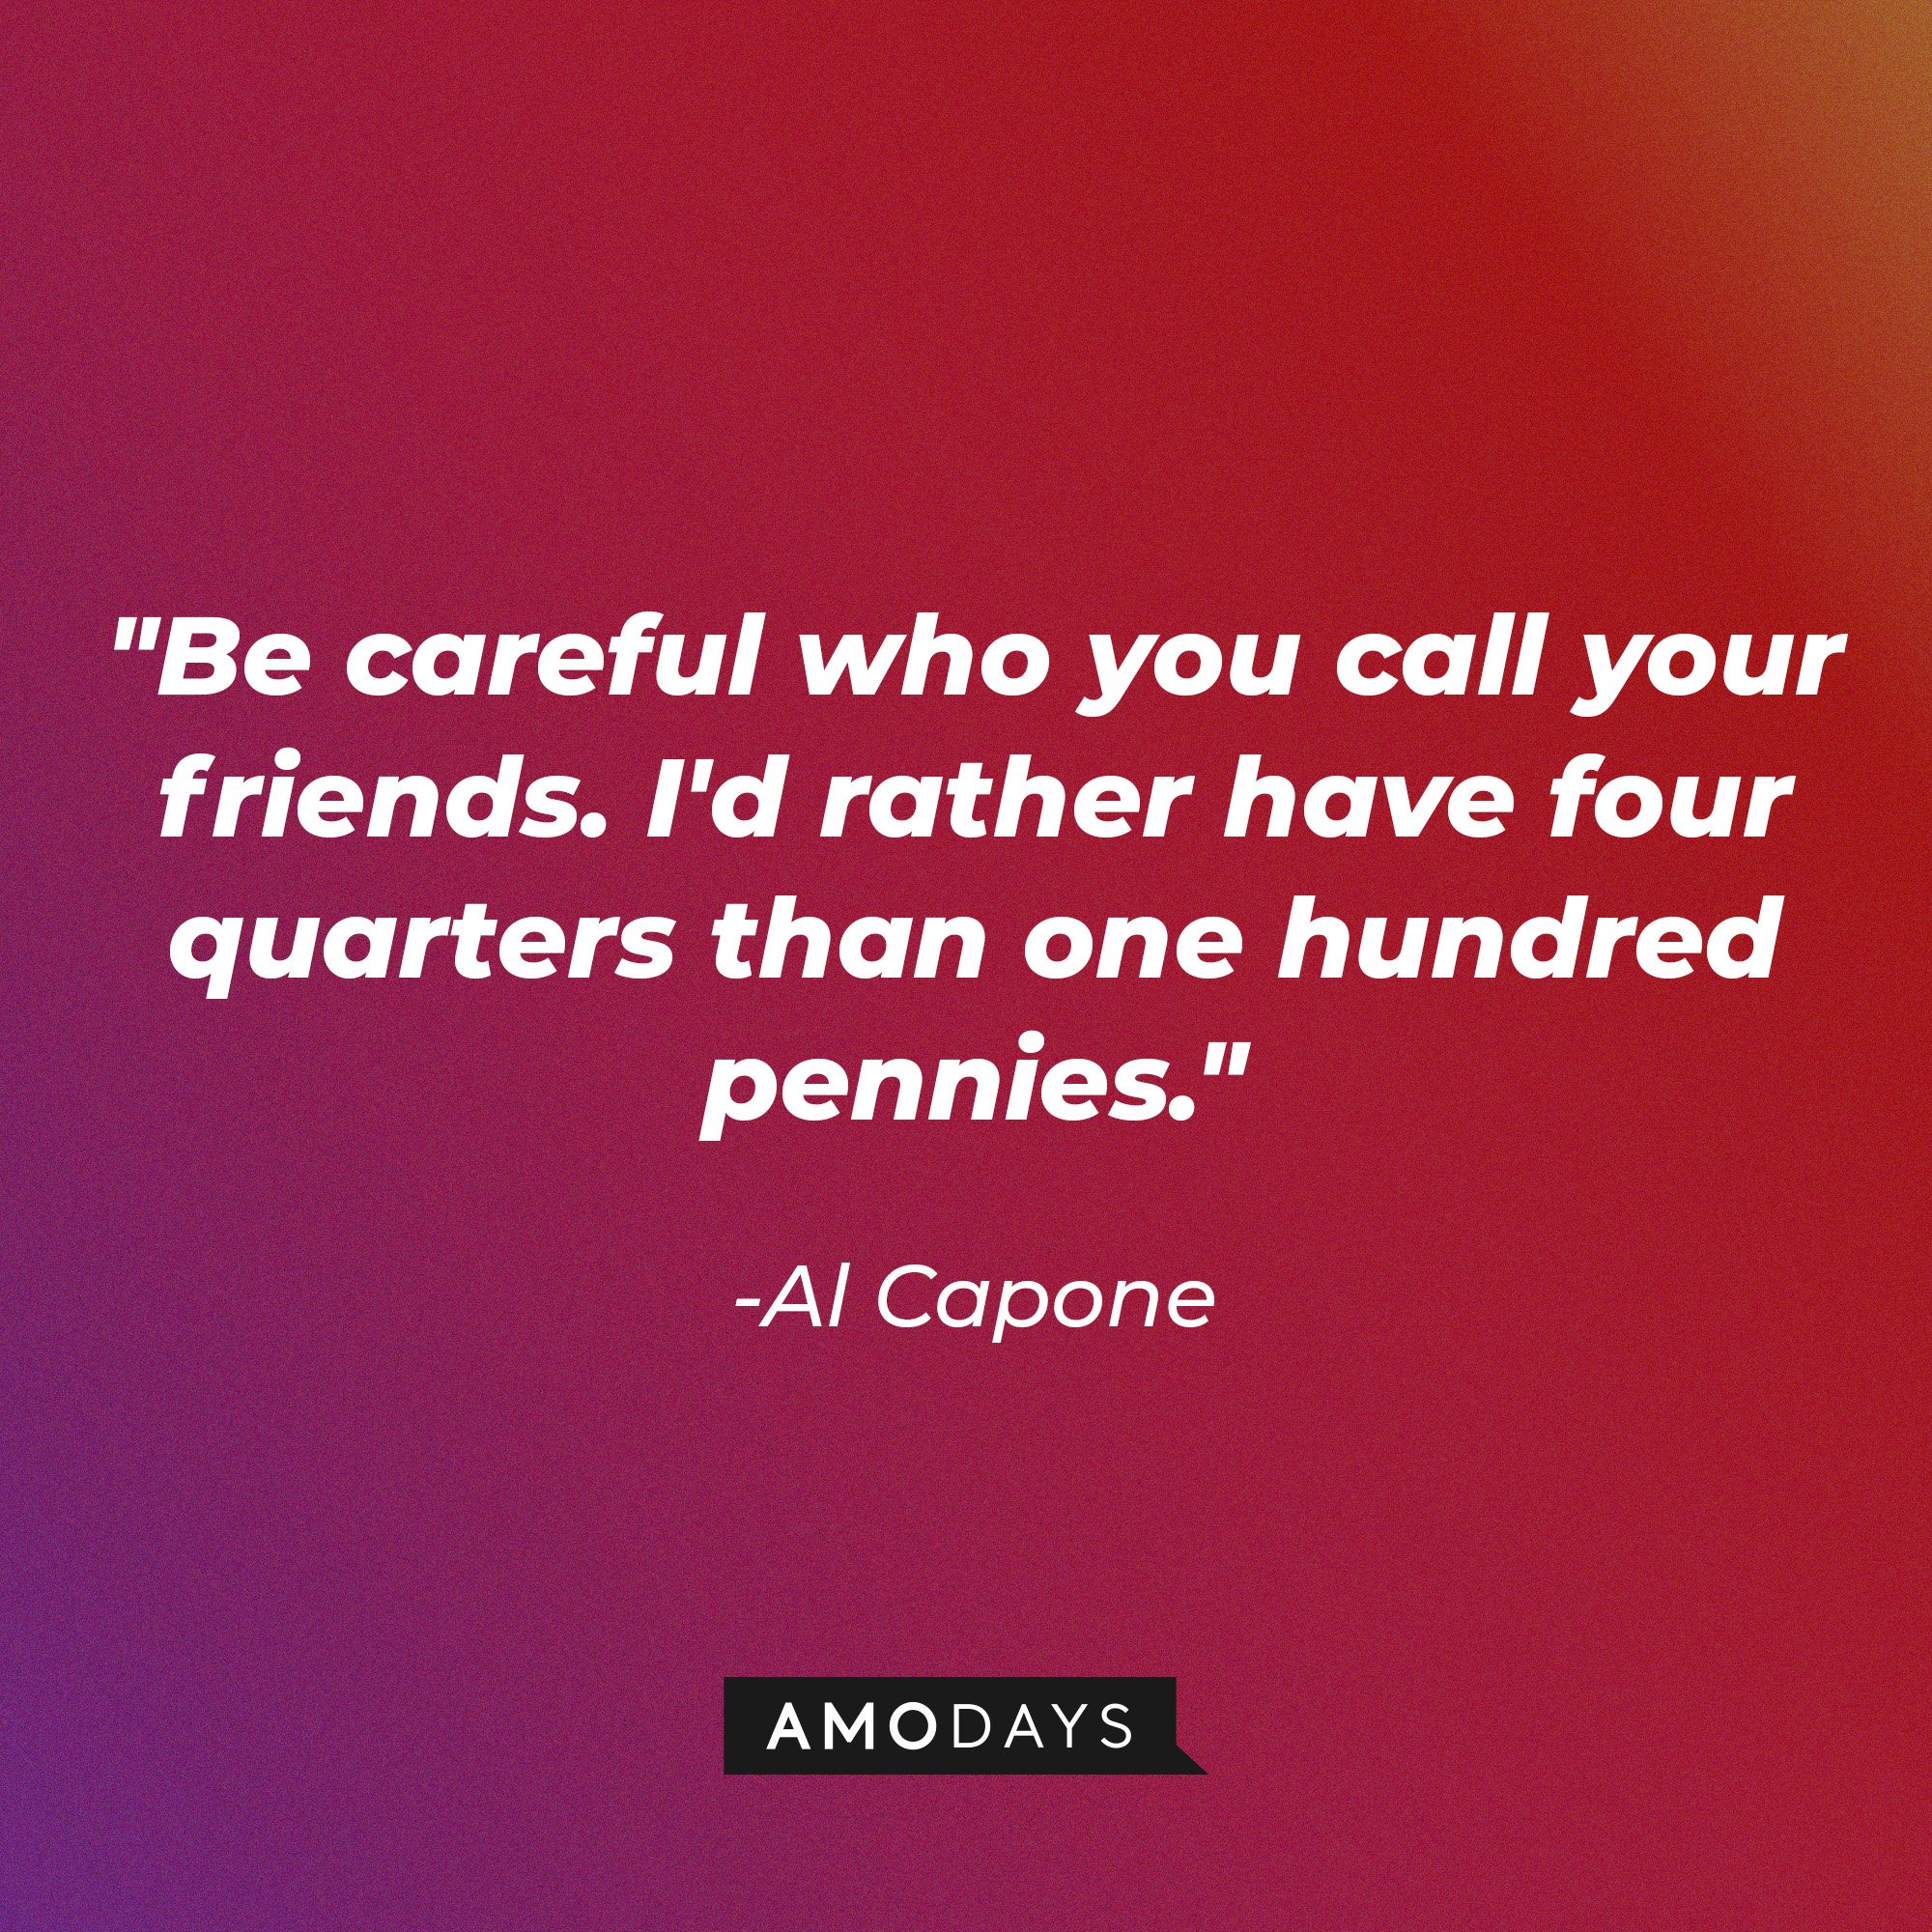 Al Capone’s quote: "Be careful who you call your friends. I'd rather have four quarters than one hundred pennies." | Image: AmoDays